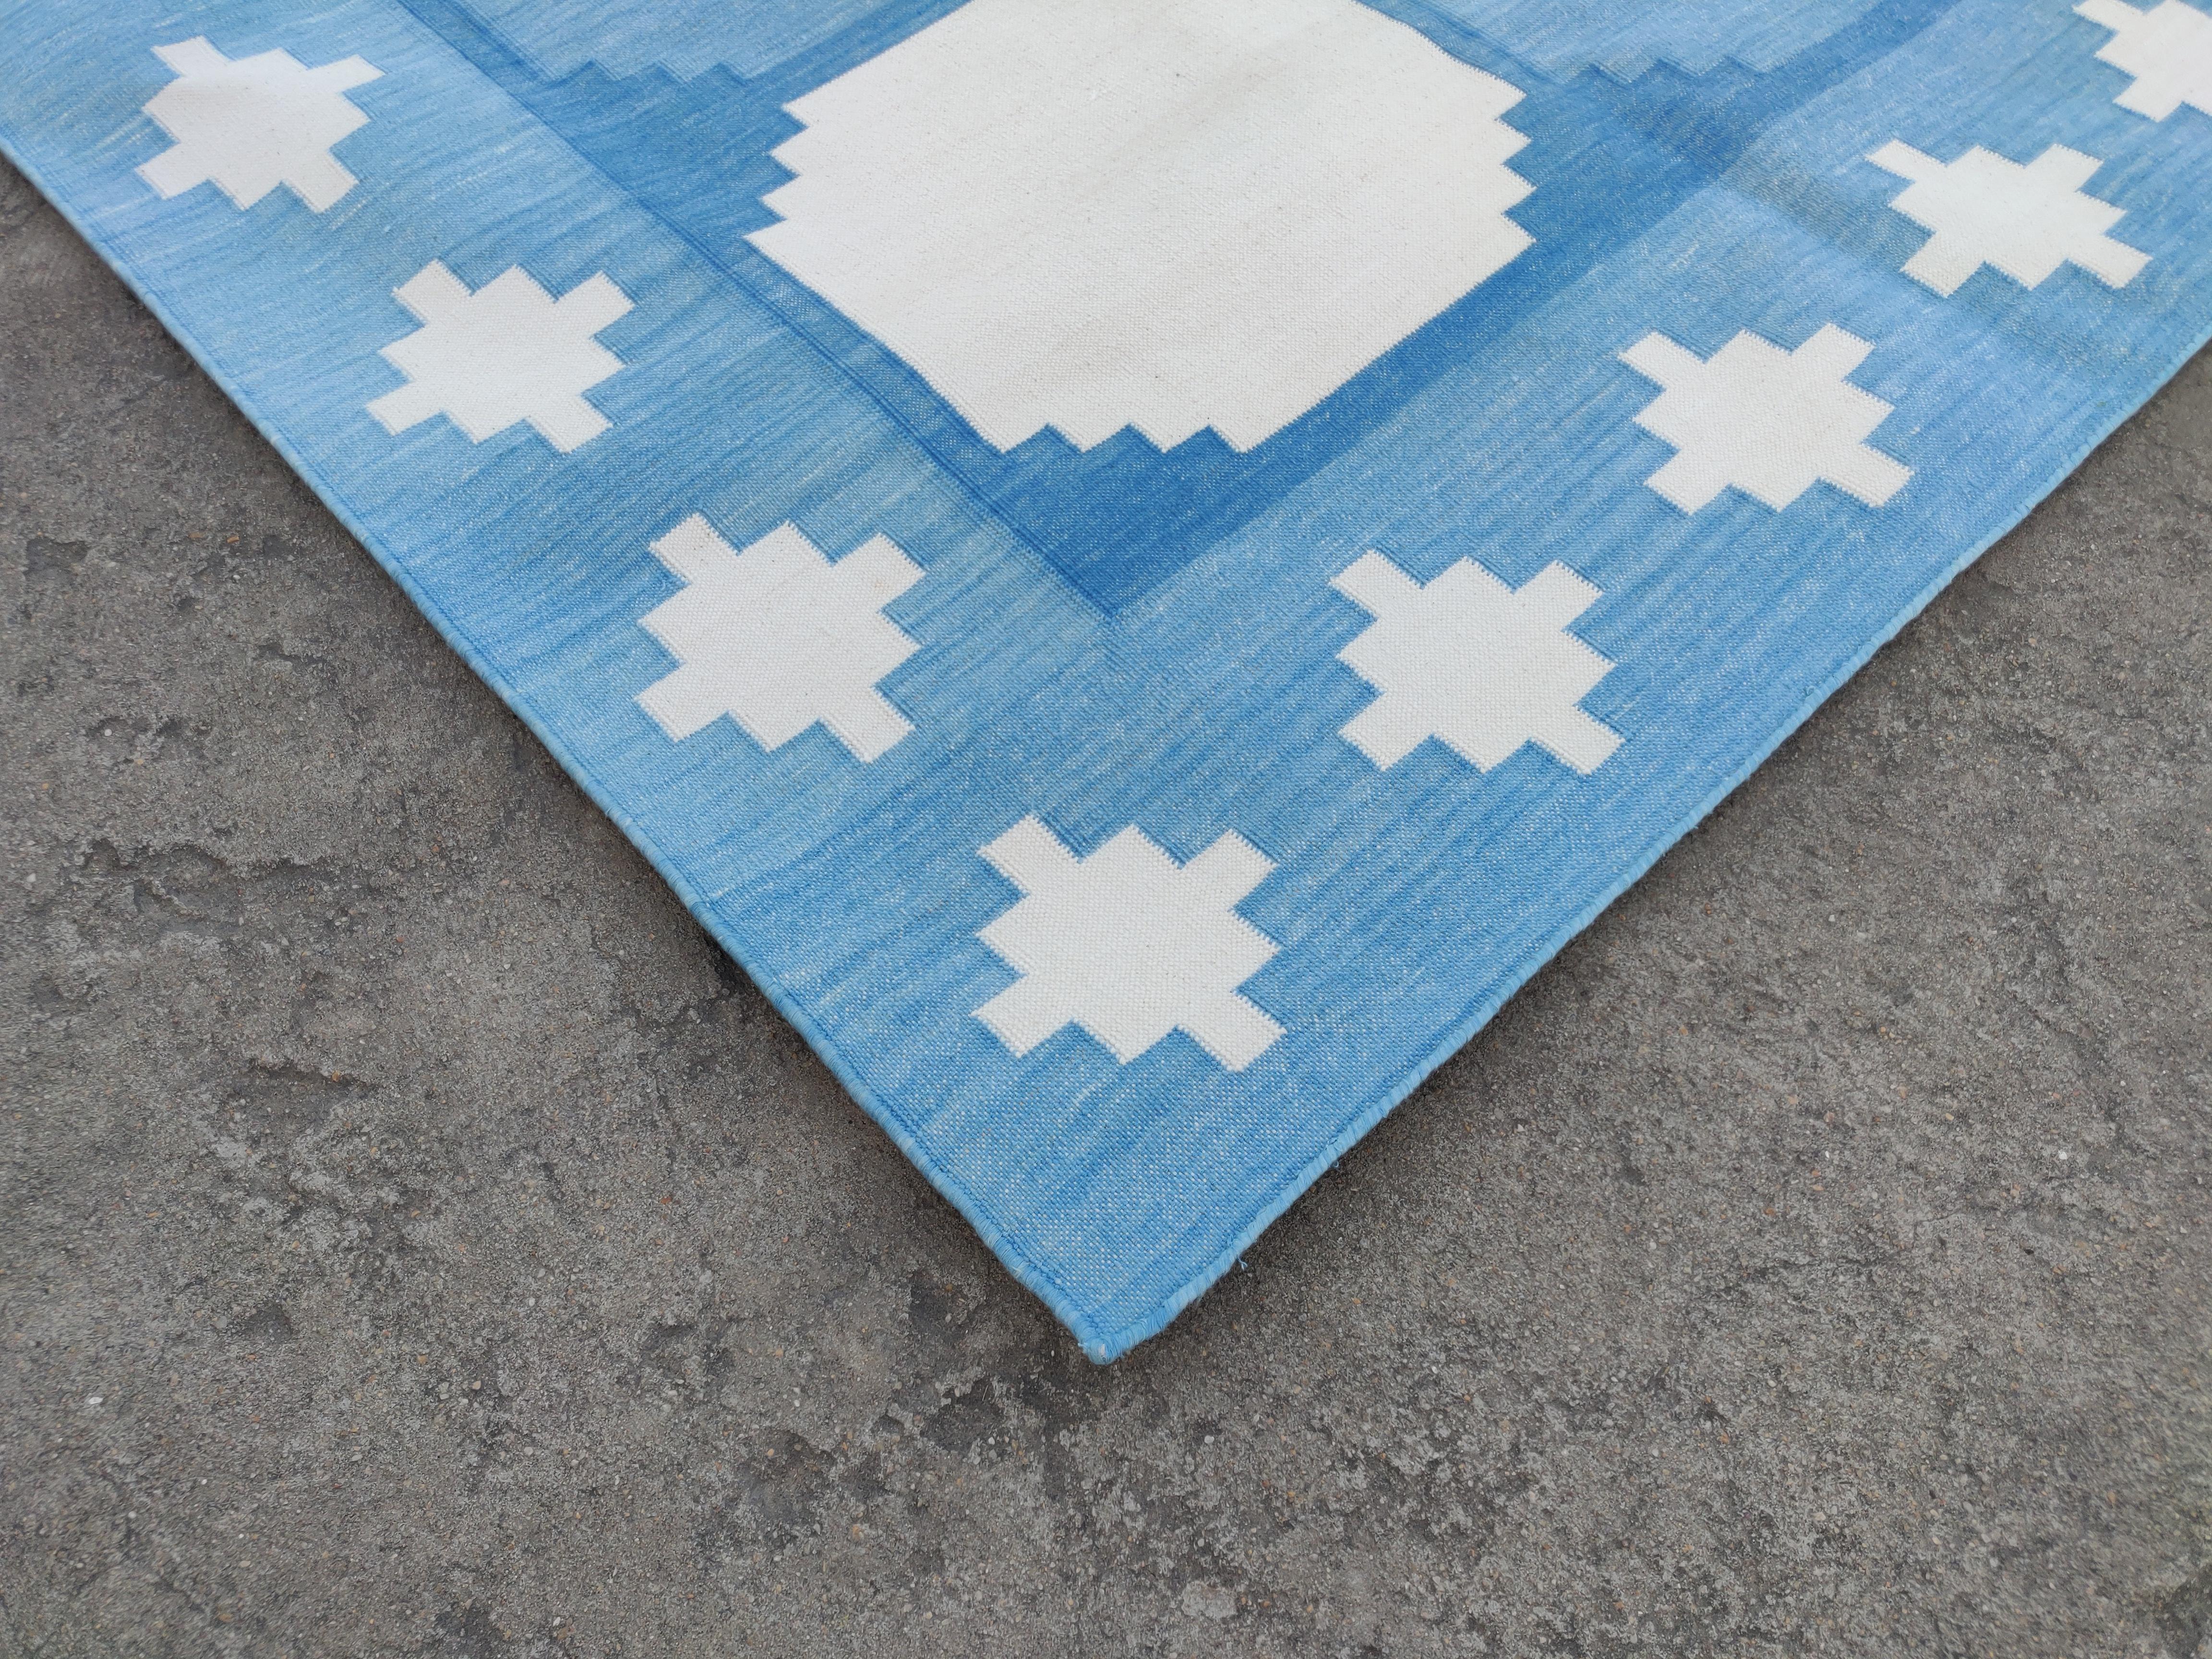 Hand-Woven Handmade Cotton Flat Weave Rug, 9x12 Blue And White Tile Pattern Indian Dhurrie For Sale